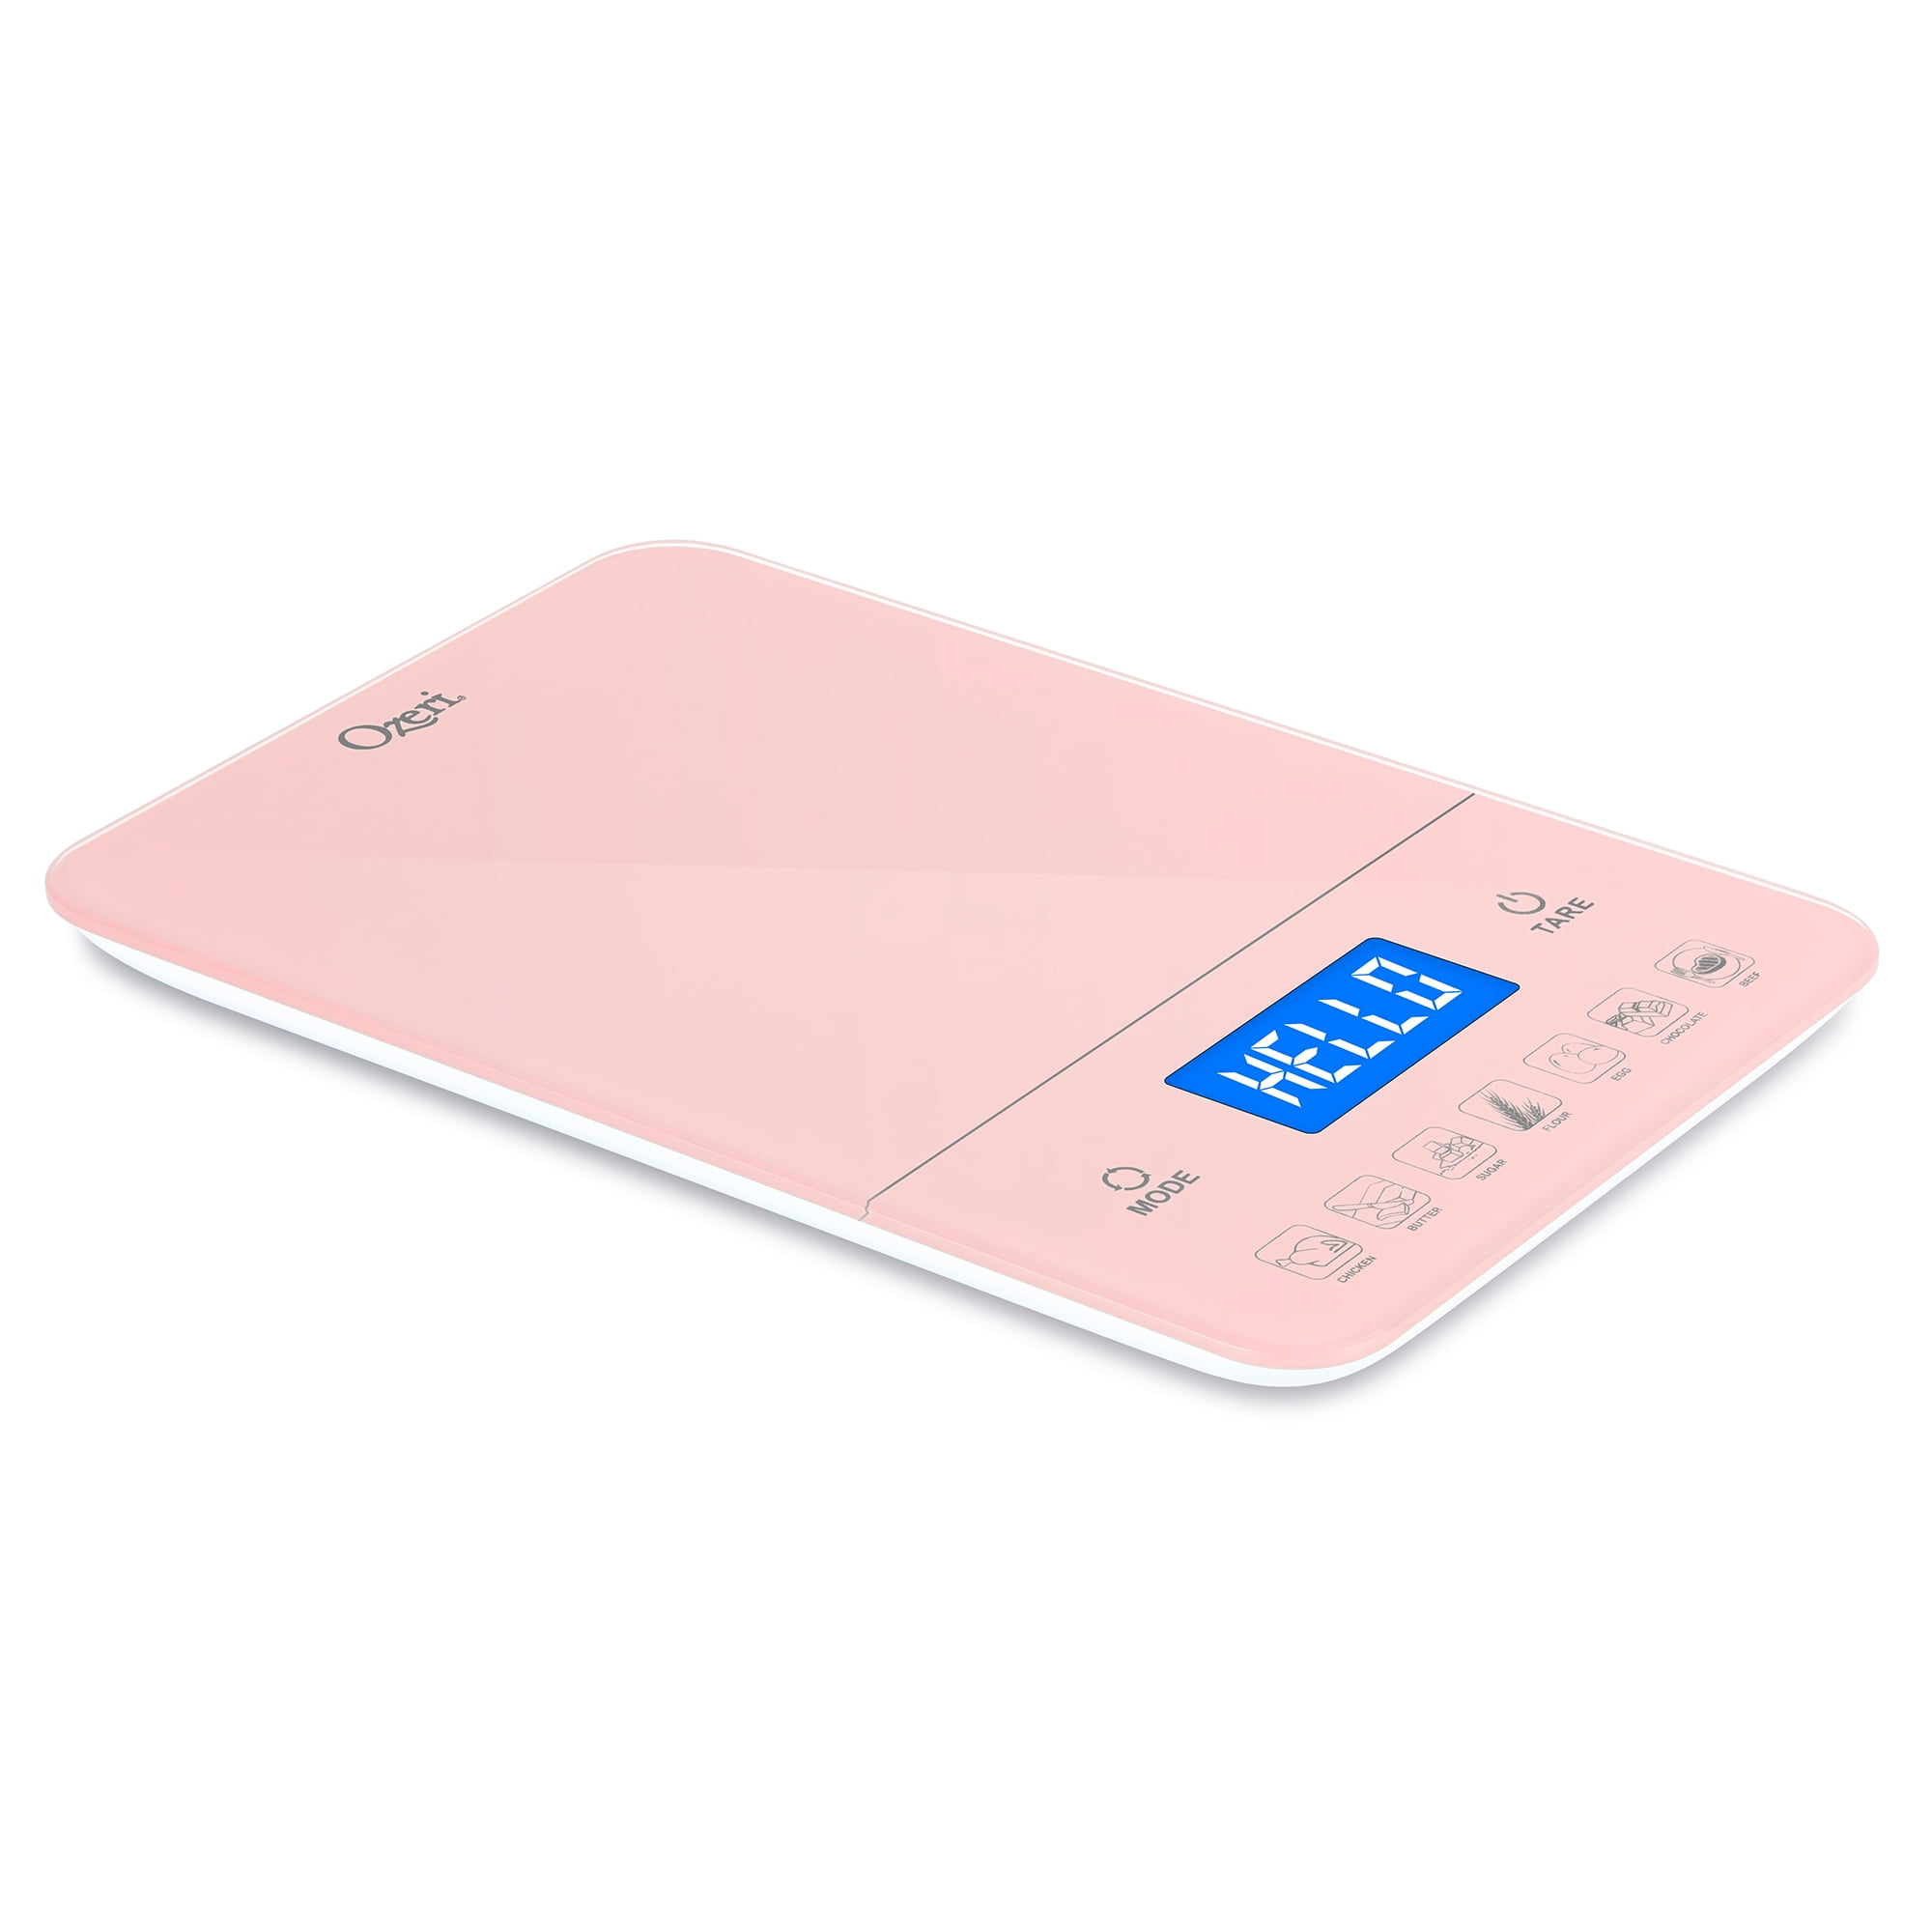 Ozeri Touch III 22 lbs (10 kg) Digital Kitchen Scale with Calorie Counter,  in Tempered Glass, 1 - QFC